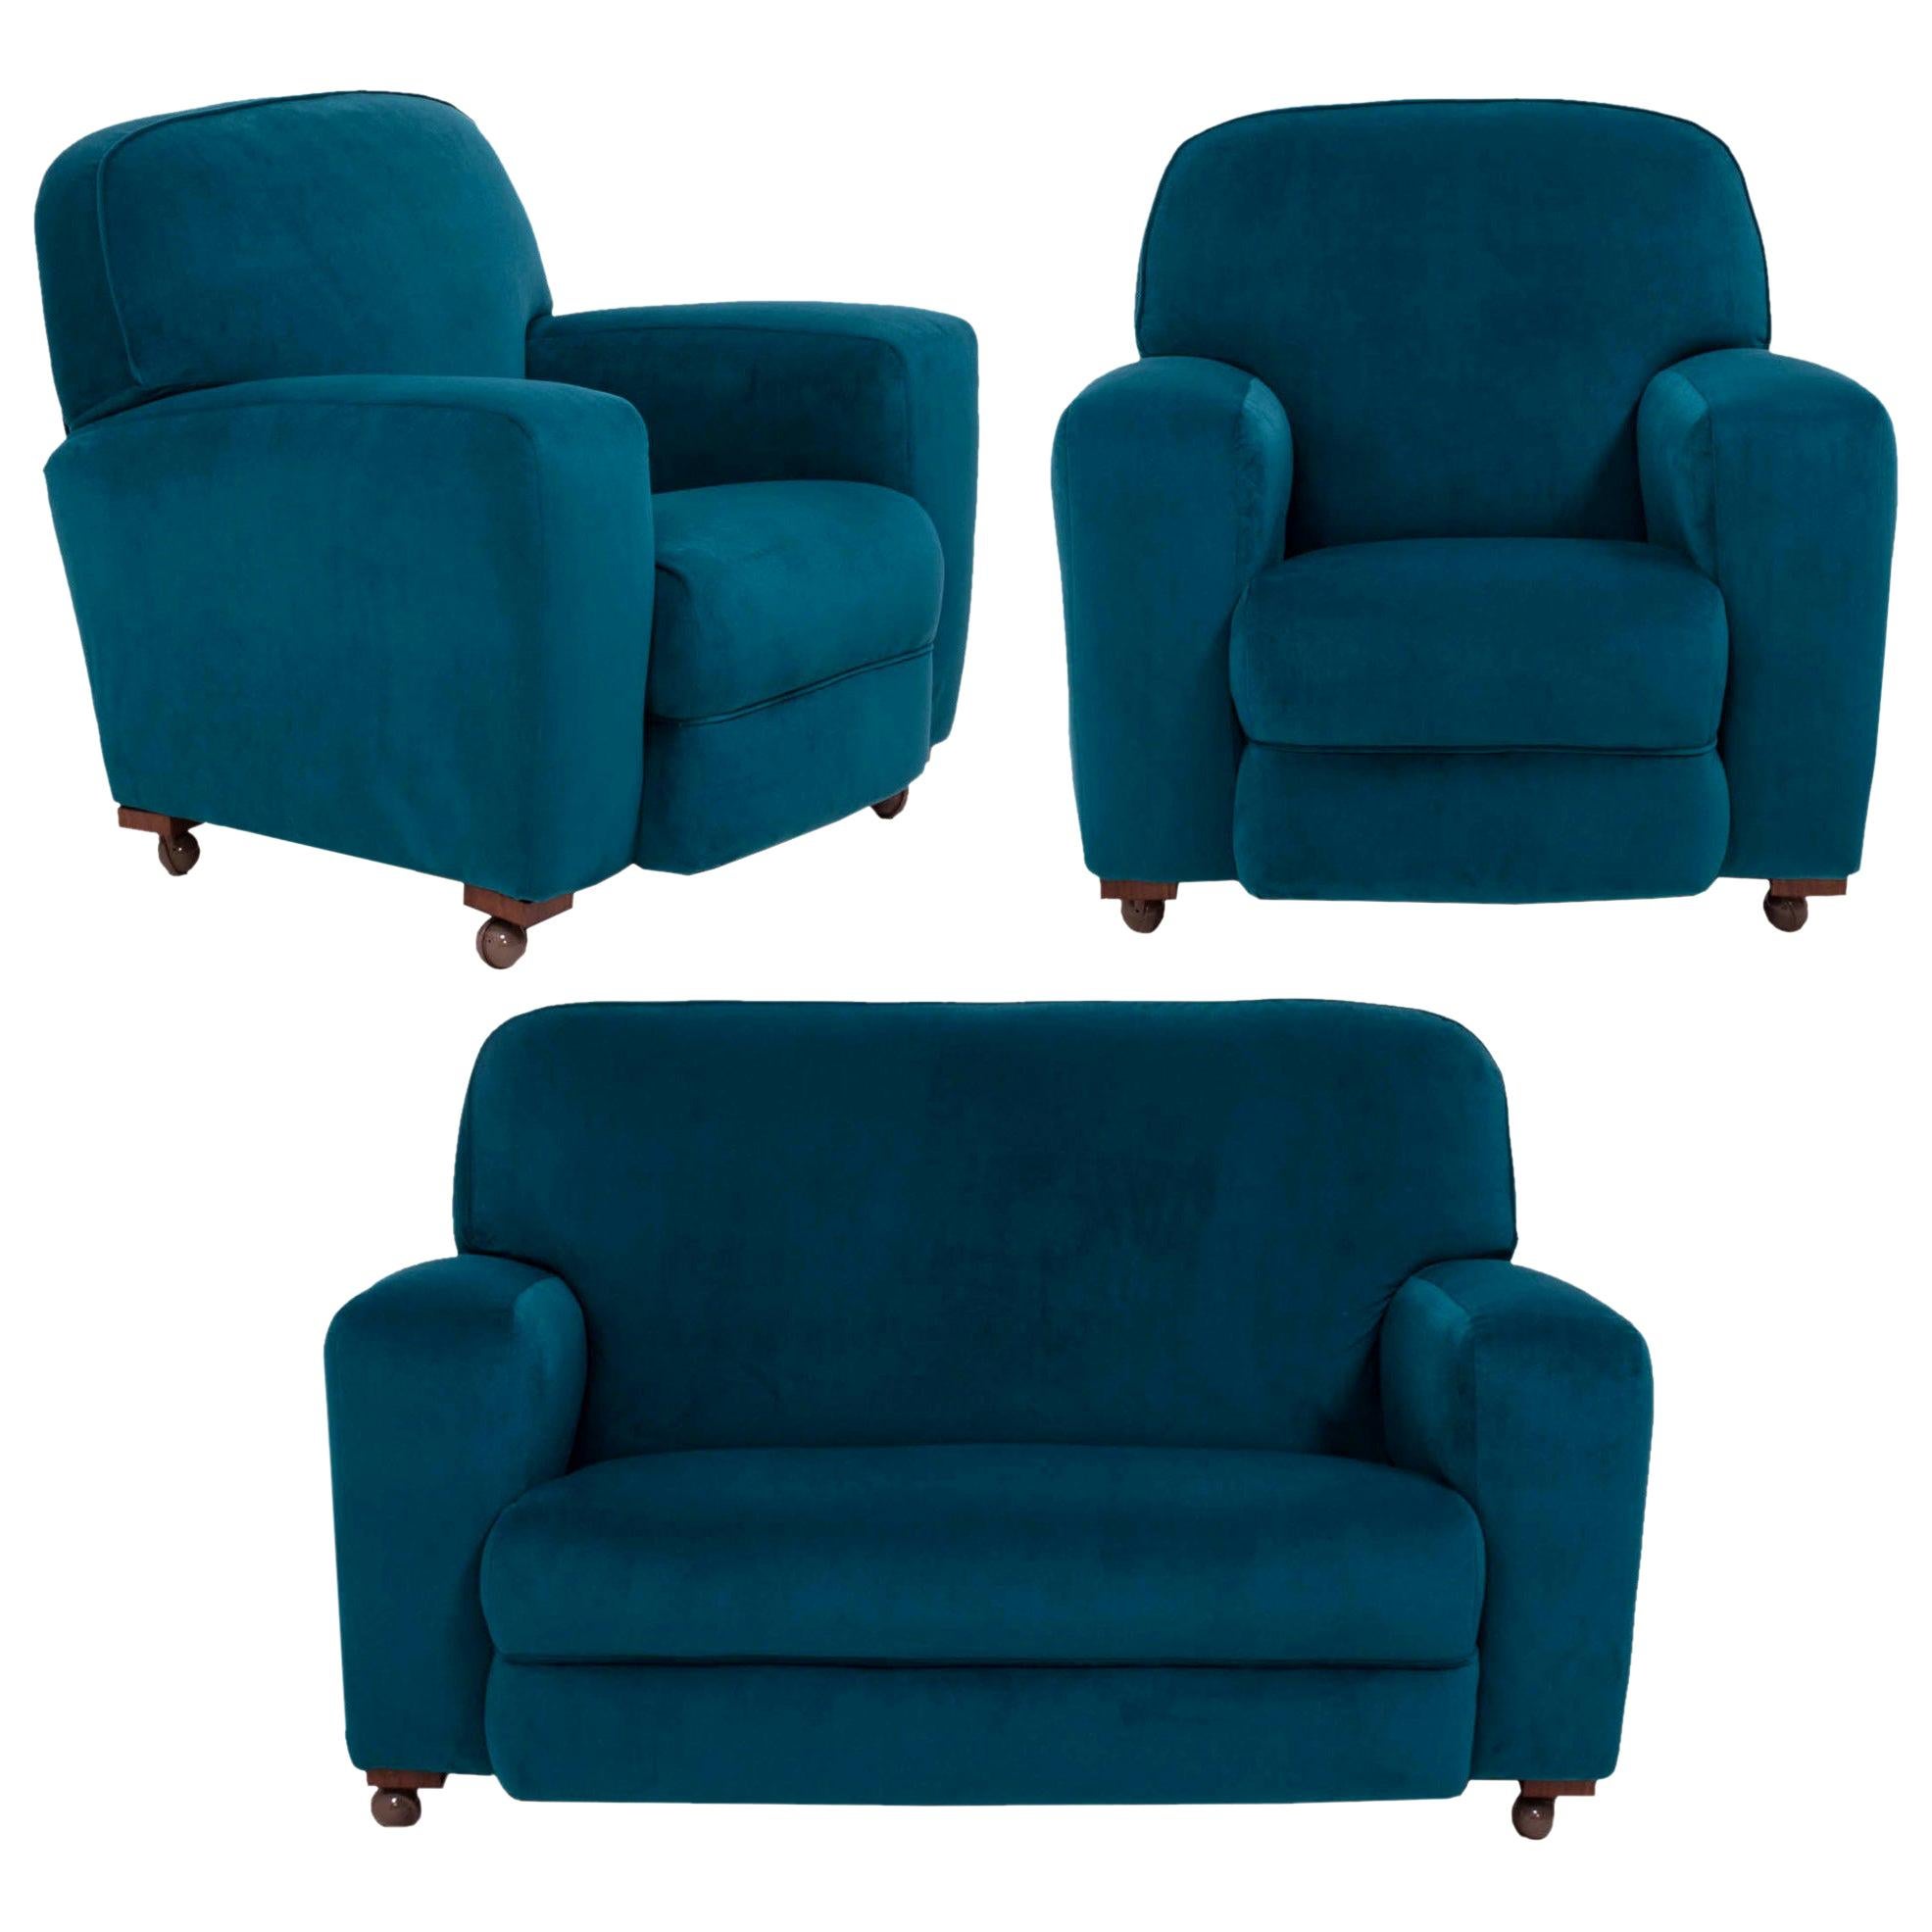 Original 1930s Art Deco Curved Blue Teal Velvet Sofa and Armchairs, Set of 3